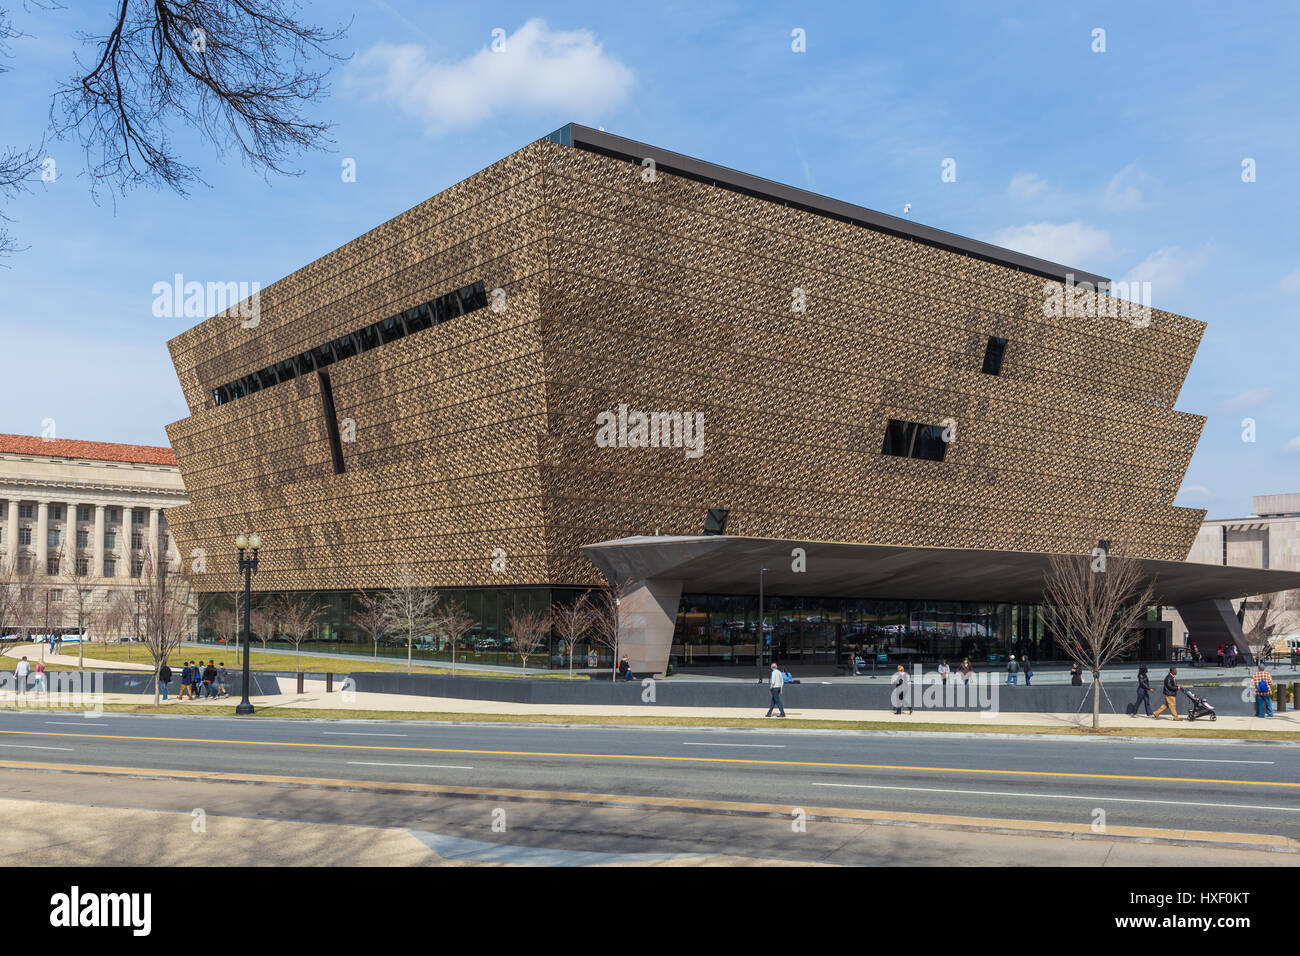 Lo Smithsonian National Museum of African American Storia e cultura (NMAAHC) in Washington, DC. Foto Stock